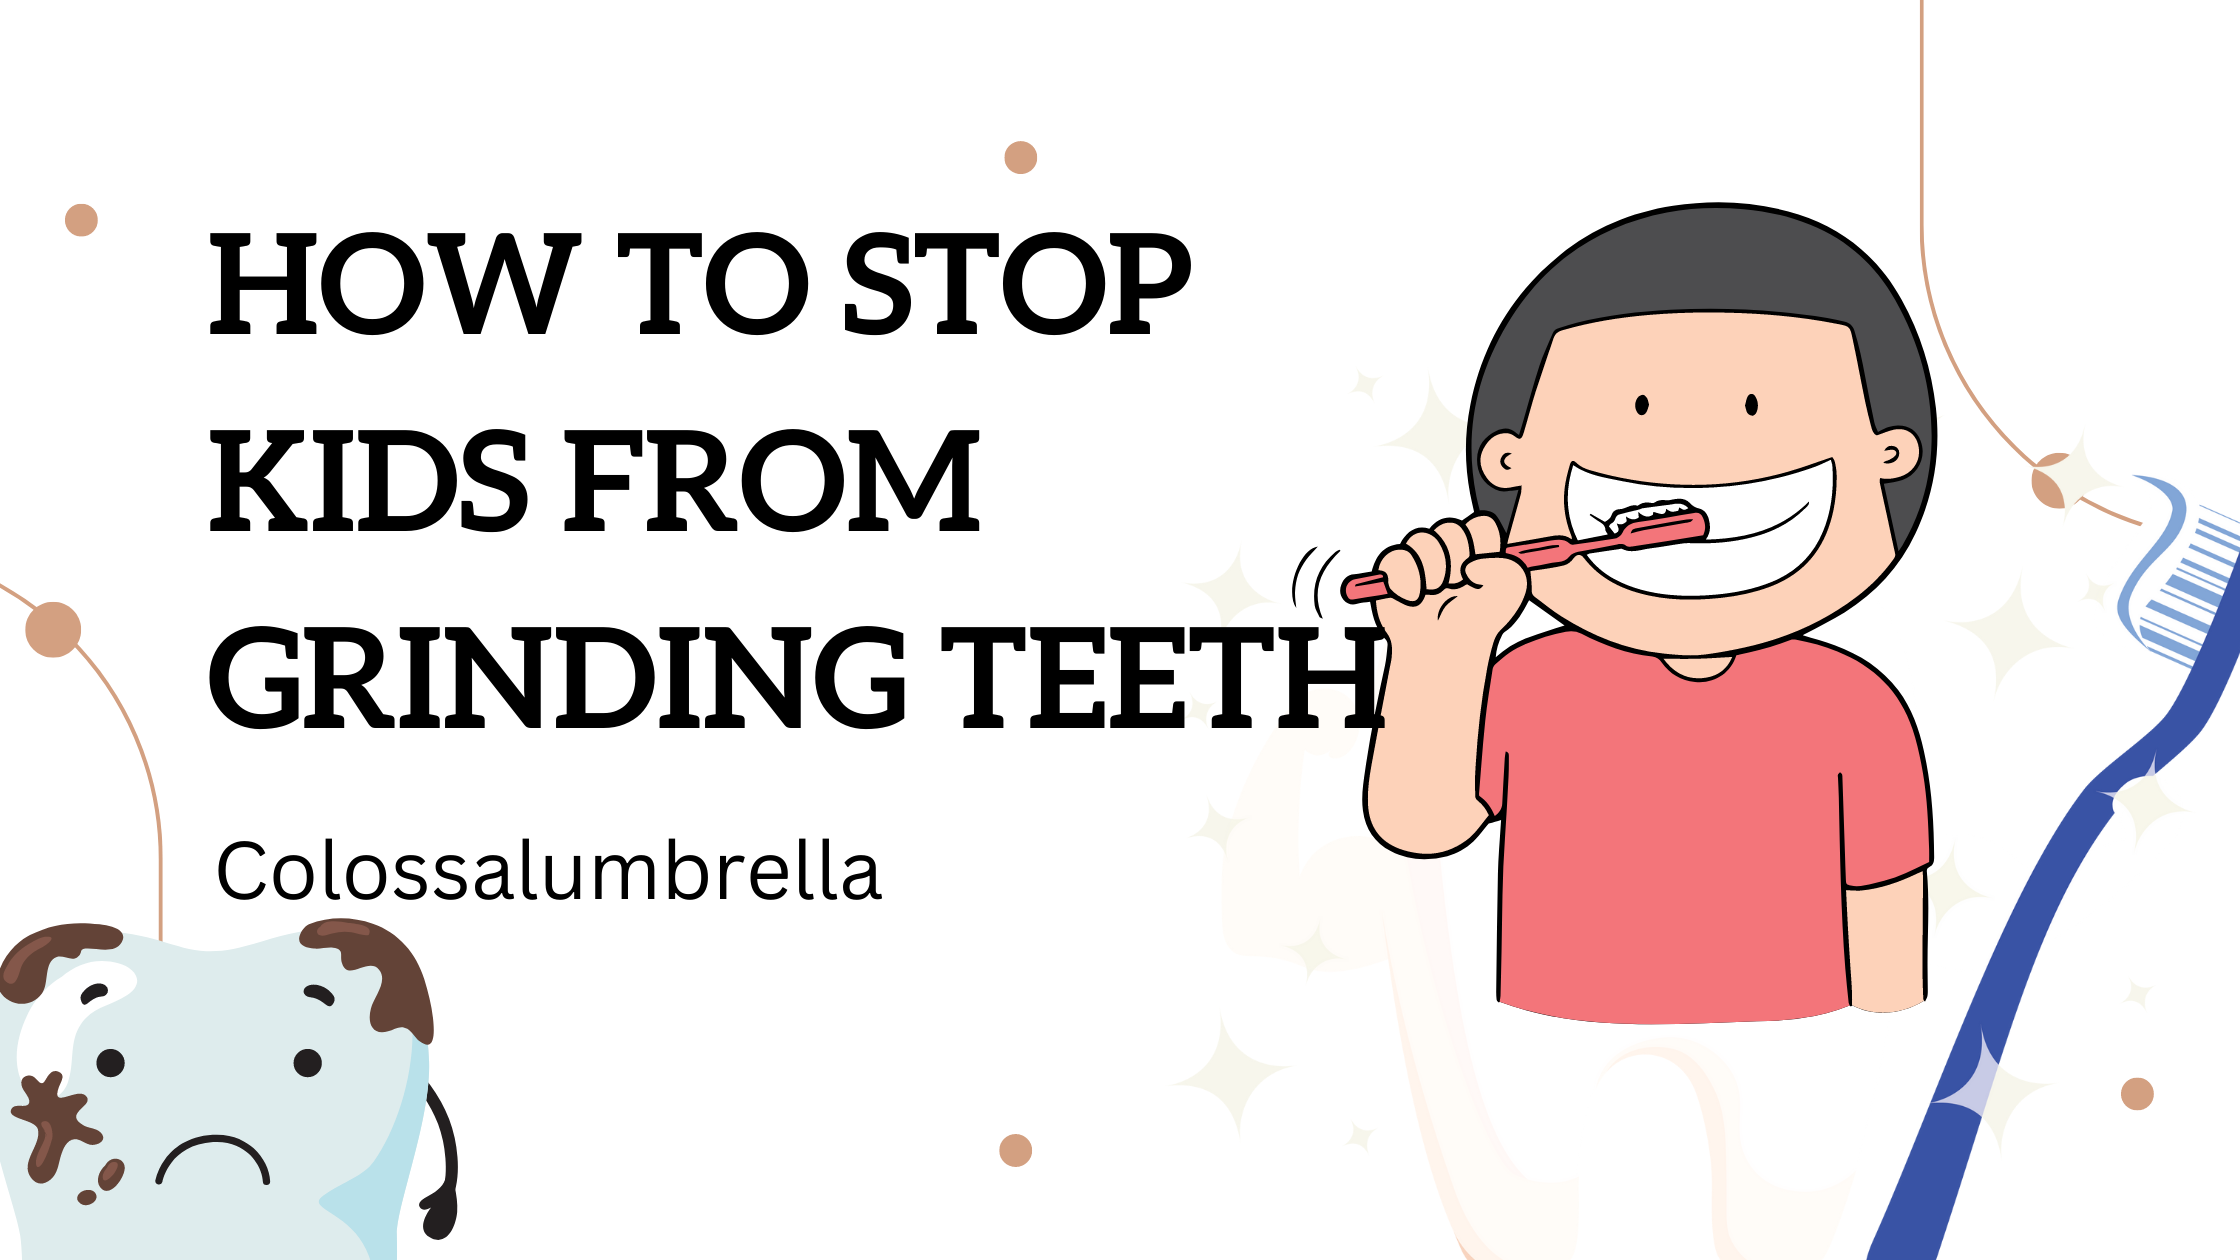 10 Effective tips on how to stop kids from grinding teeth